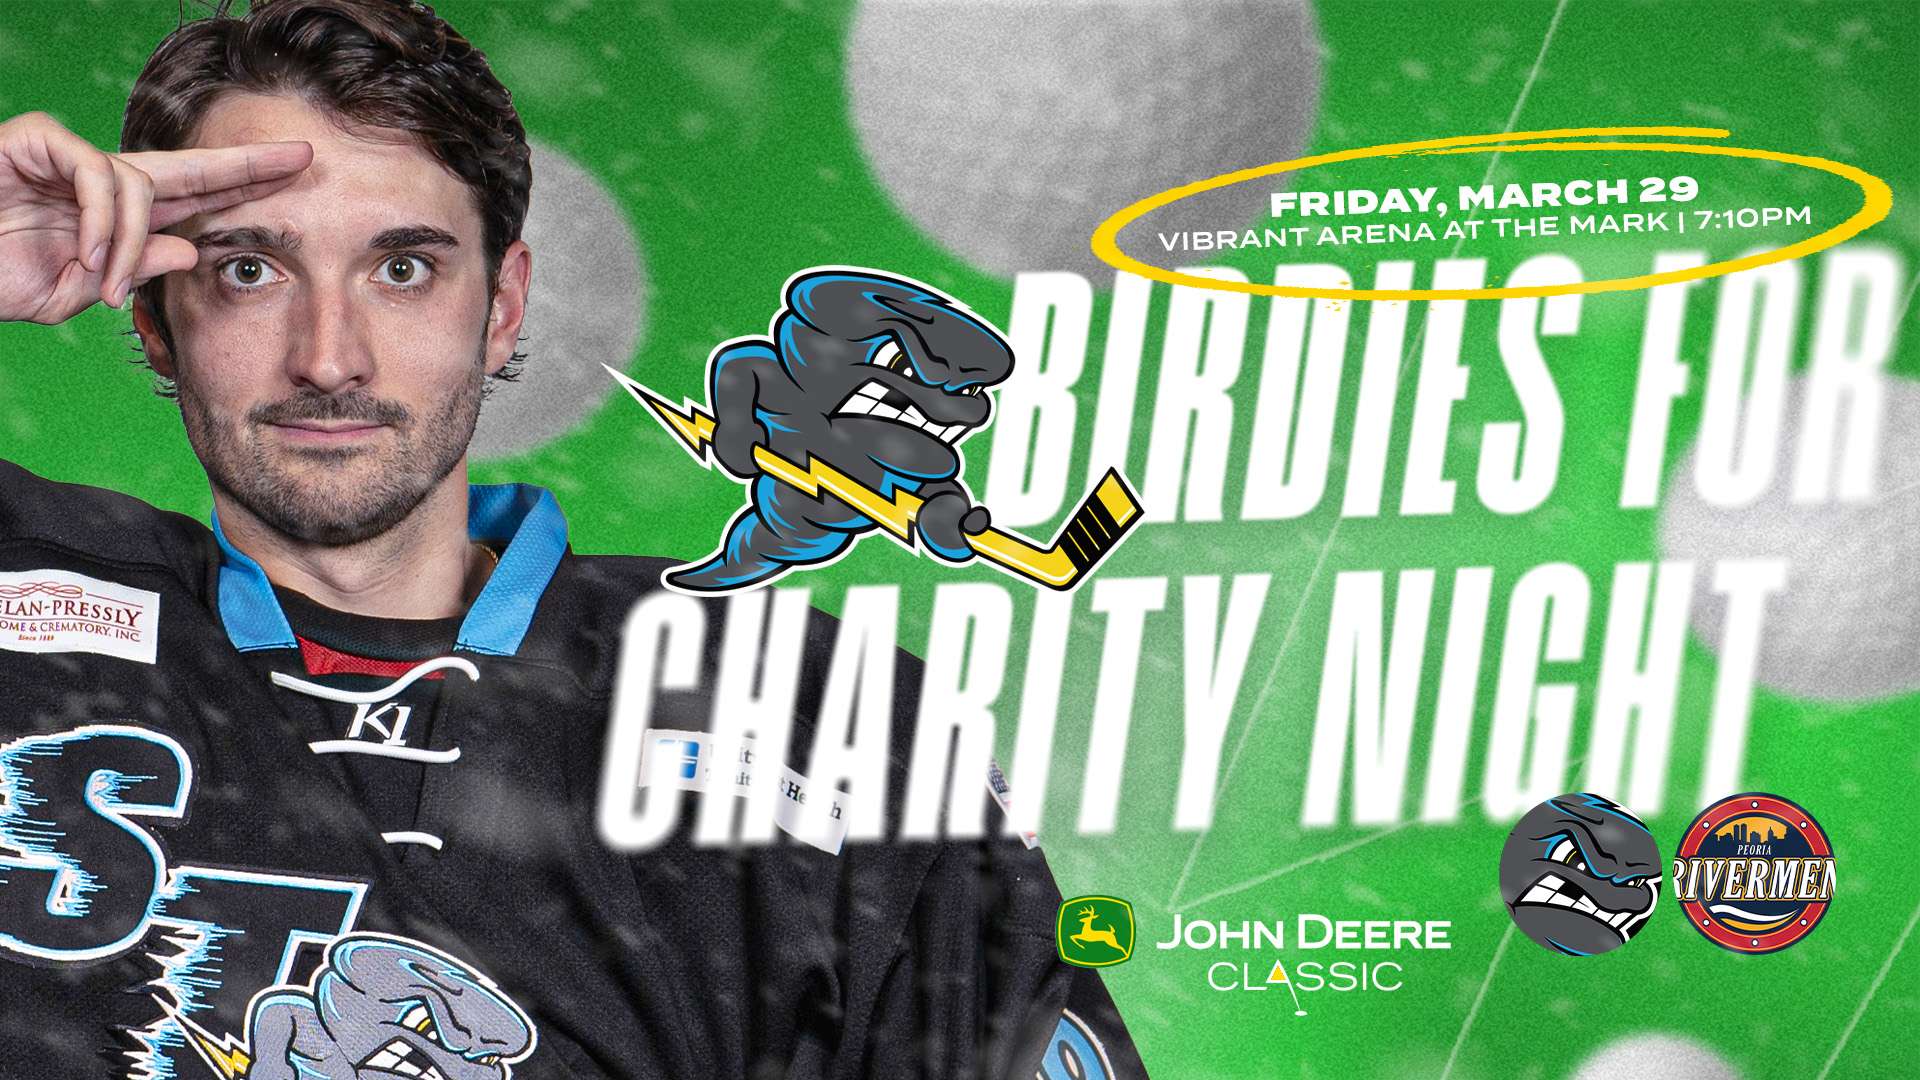 Birdies for Charity Graphic